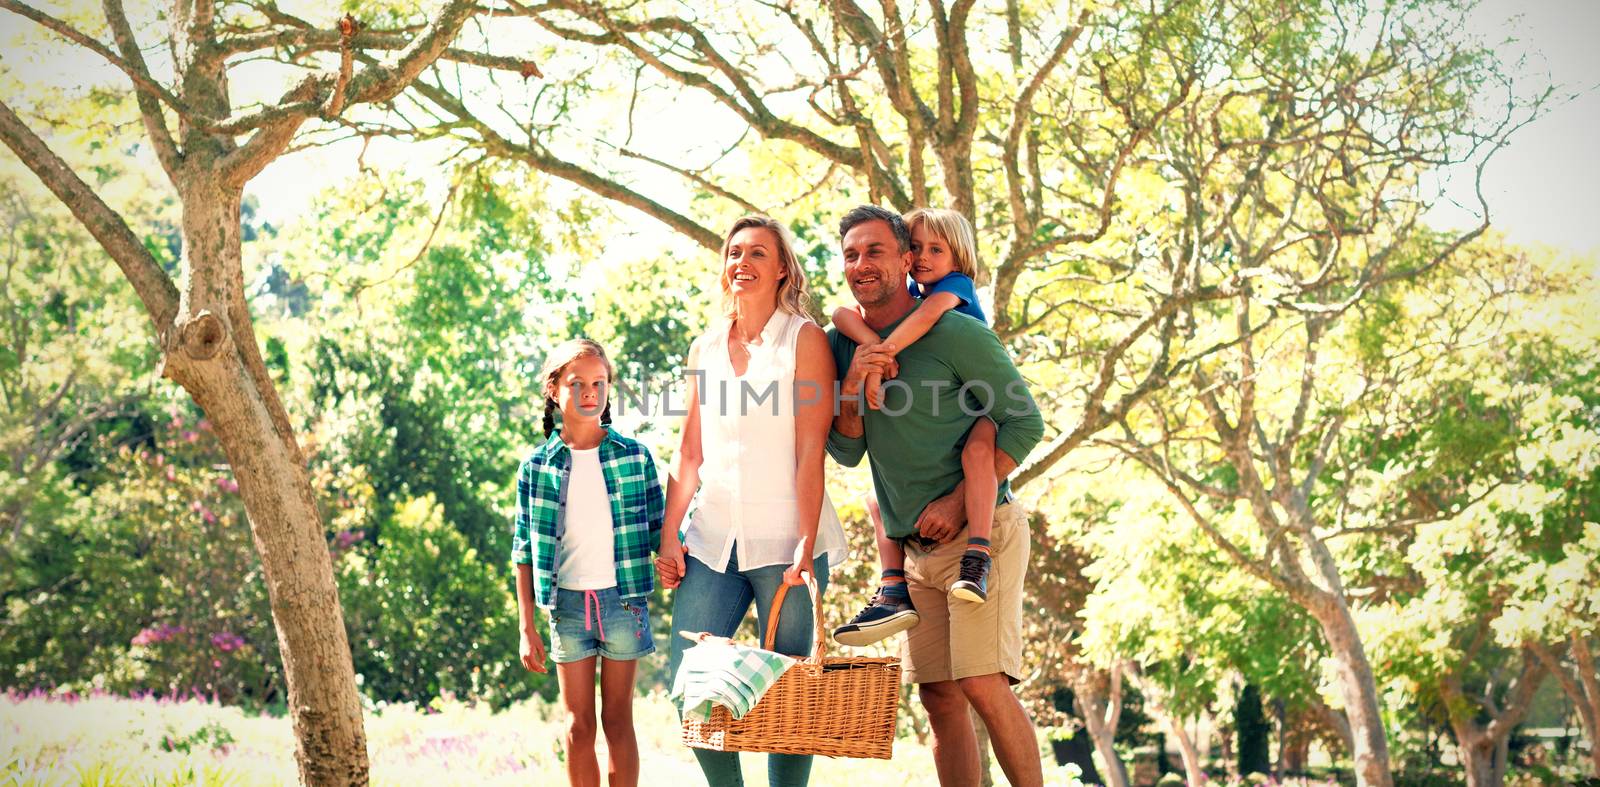 Family arriving in the park for picnic on a sunny day